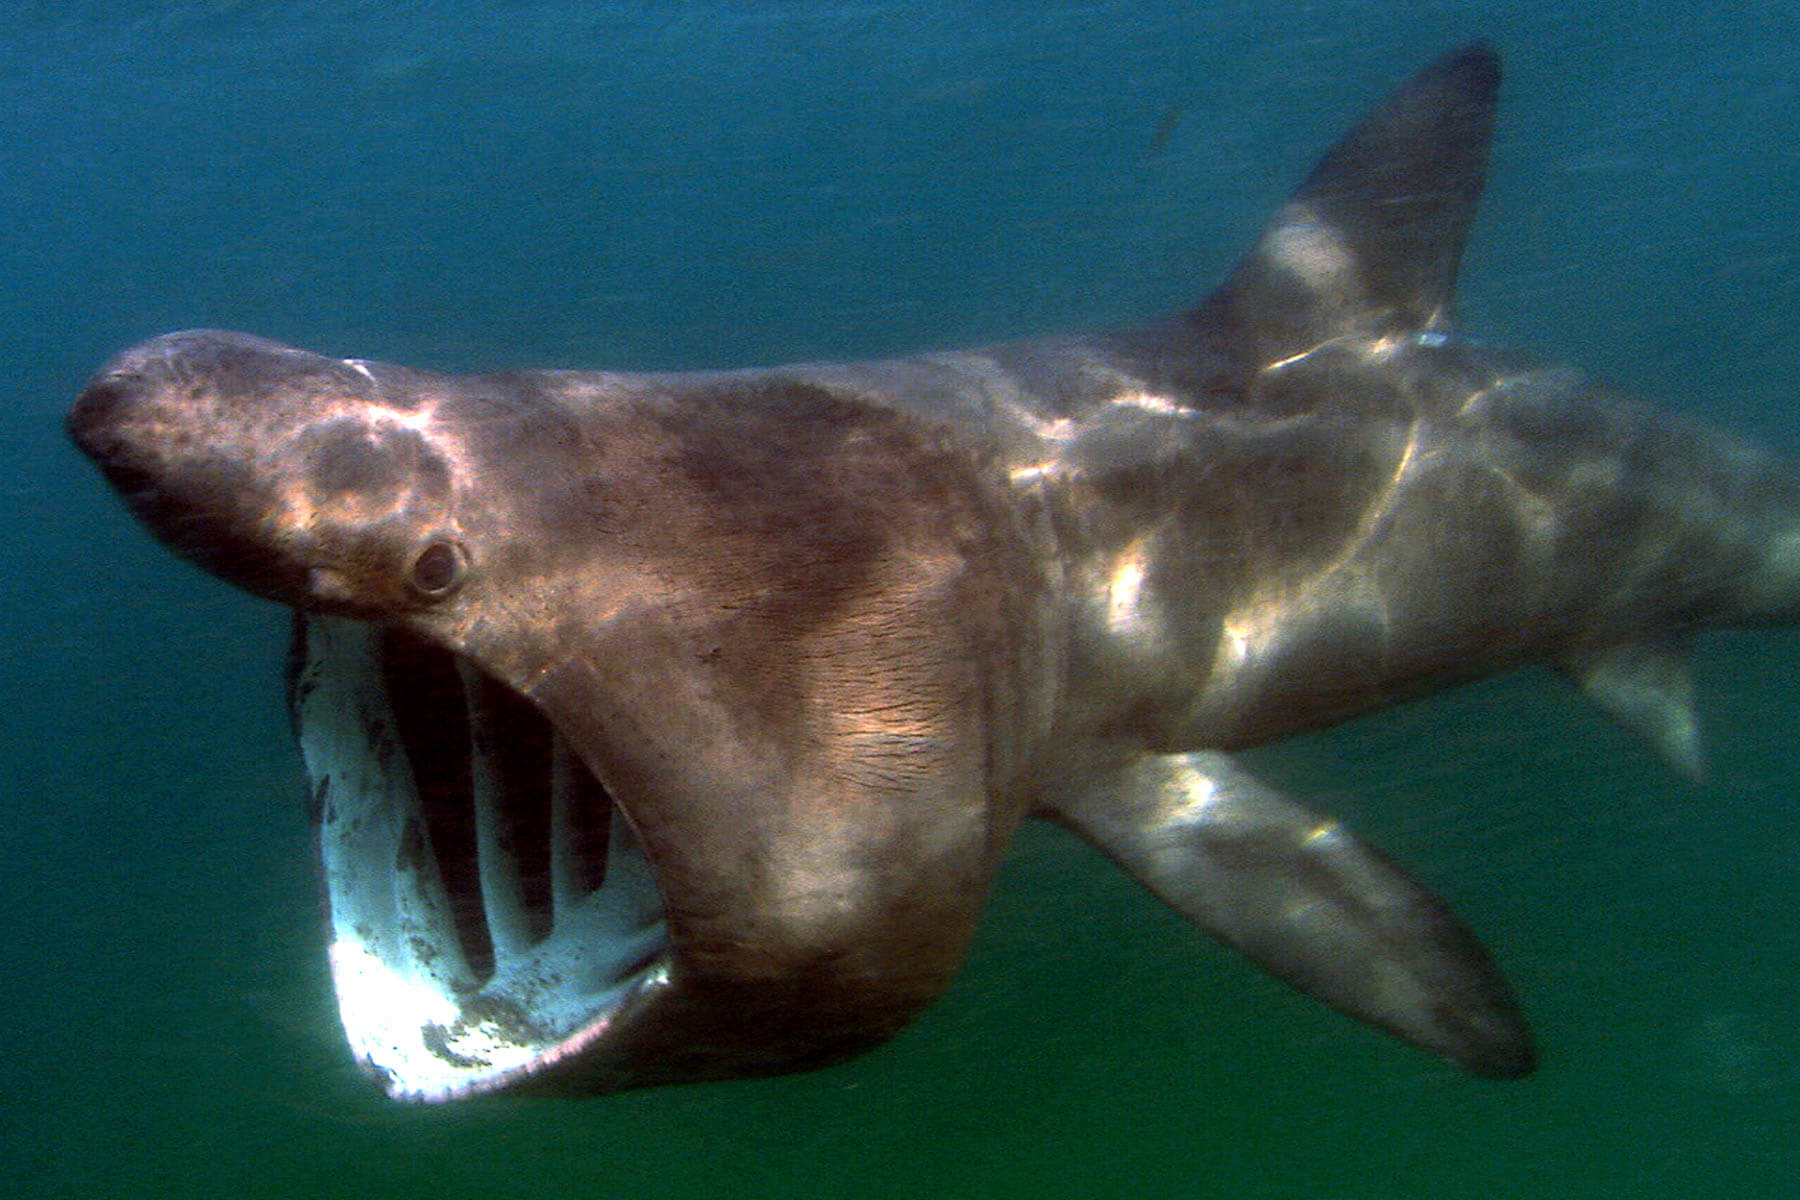 Basking shark with mouth gaping wide